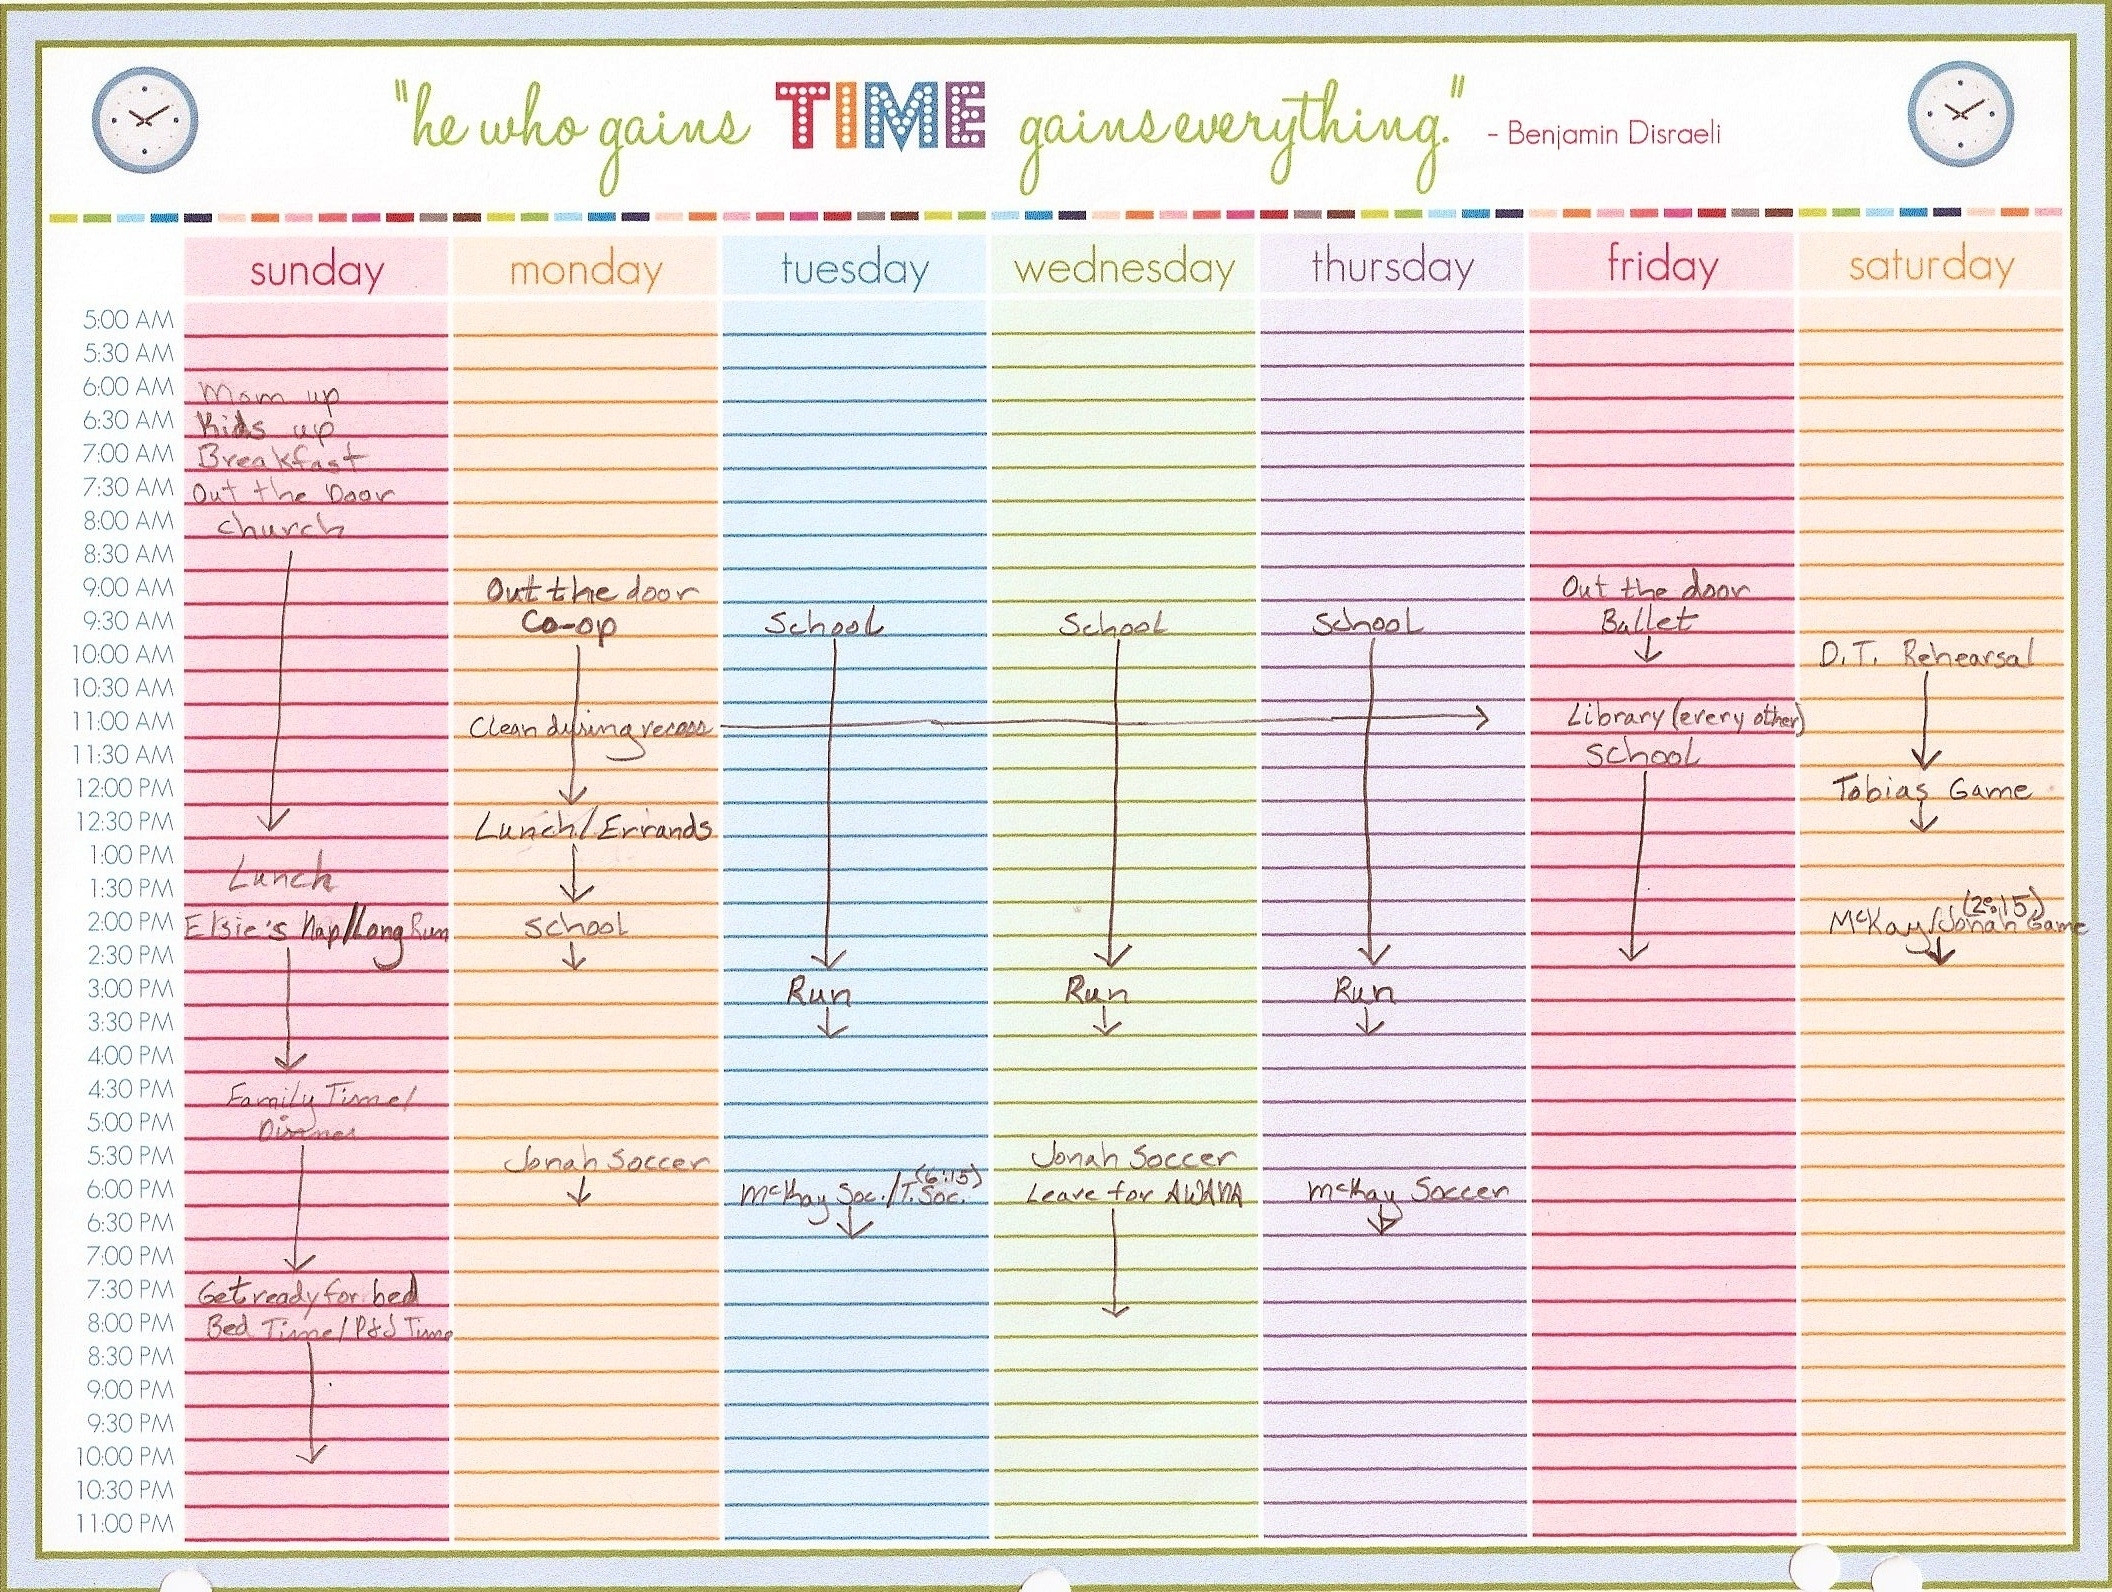 Monthly Calendars With Hourly Slots - Calendar Inspiration  Printable Weekly Calendar With Time Slots